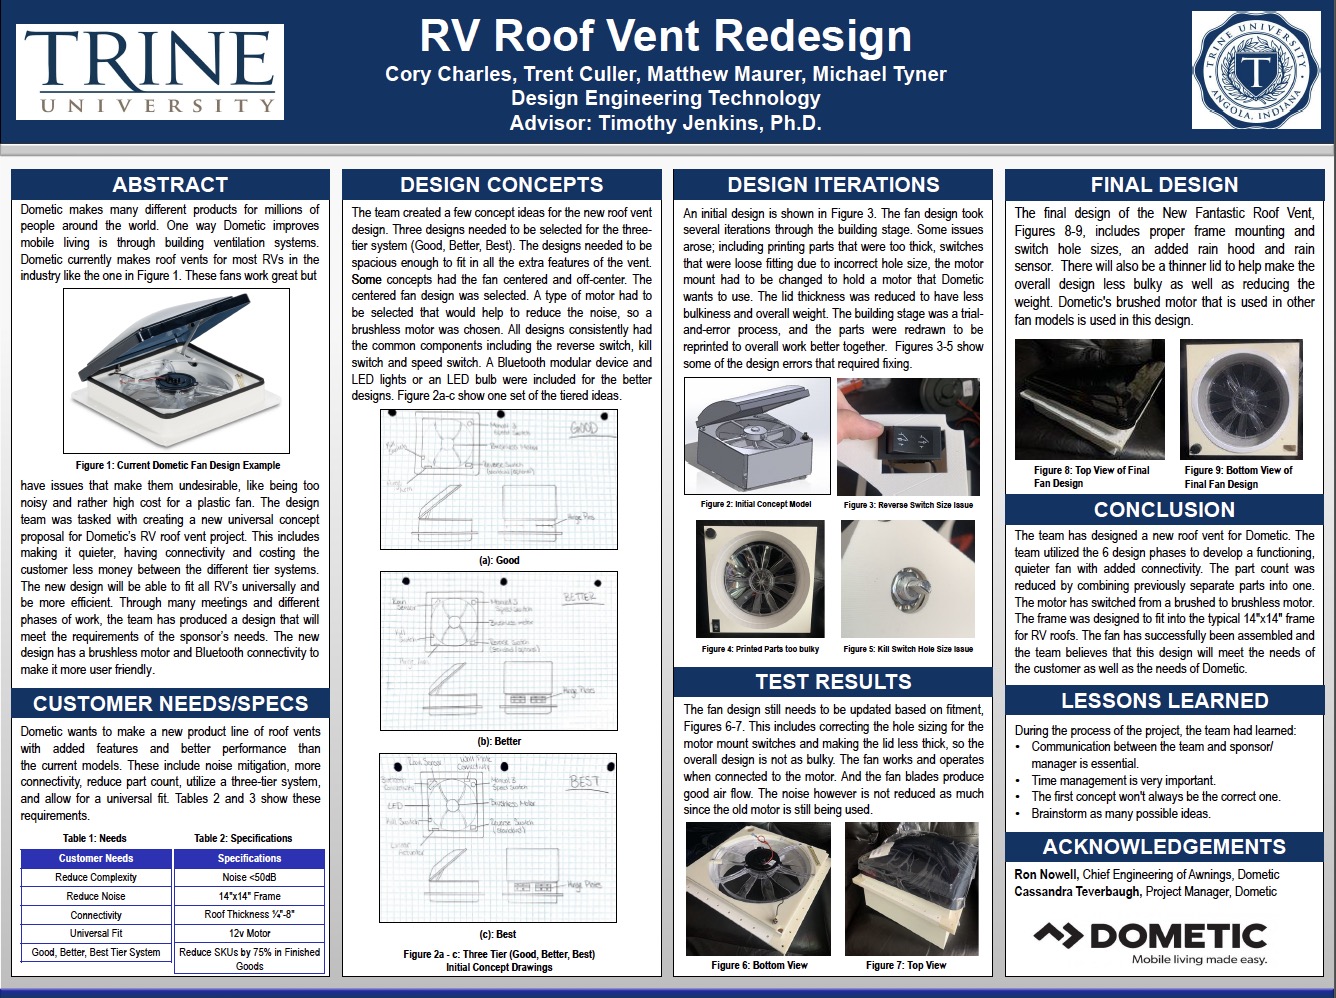 RV Roof Vent Redesign